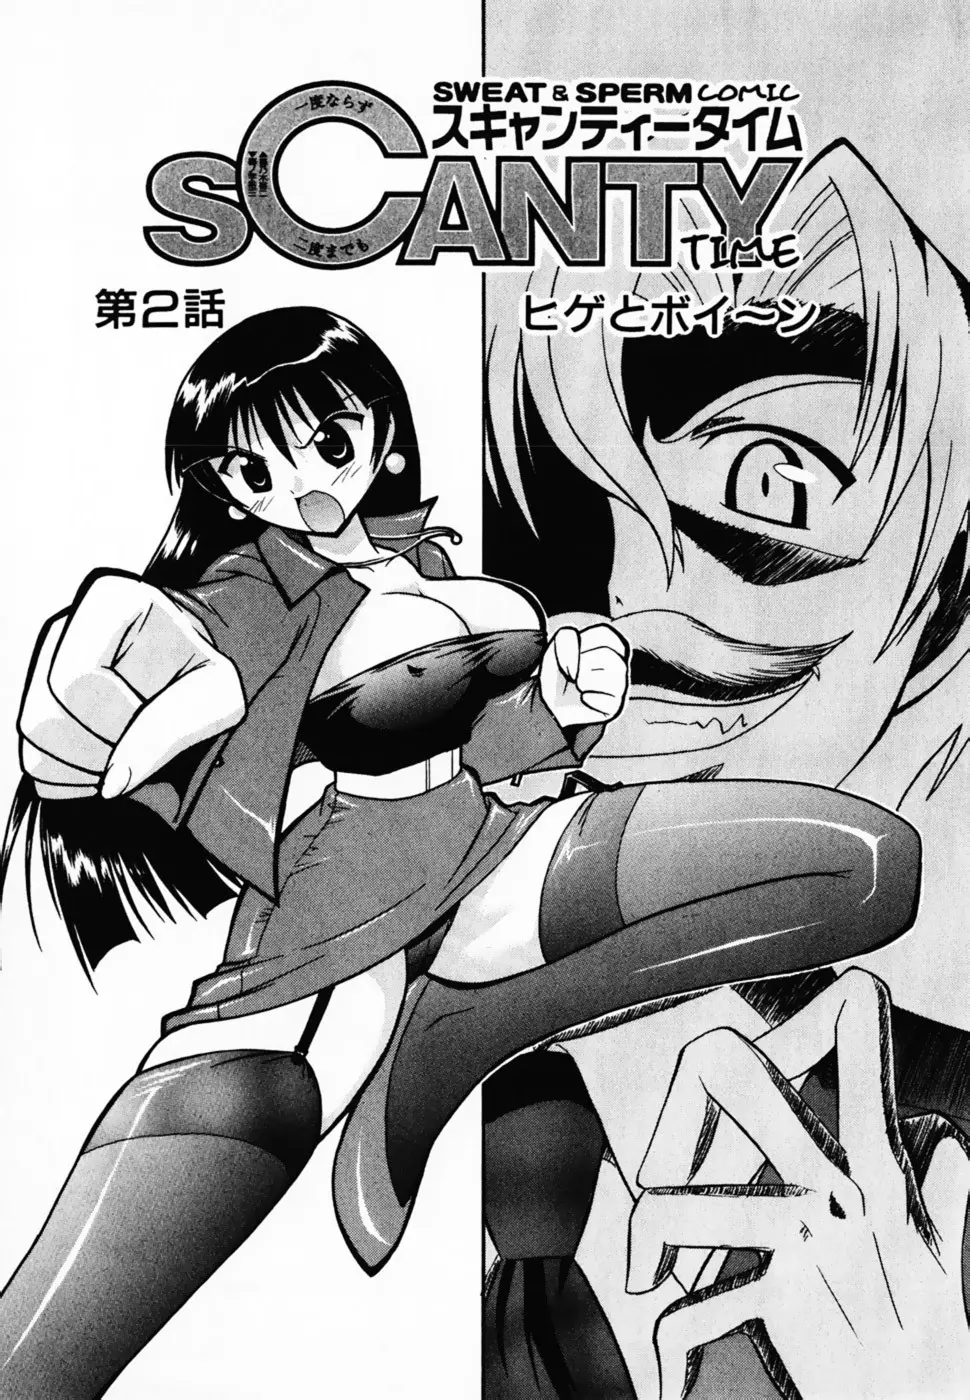 SCANTY TIME 108ページ